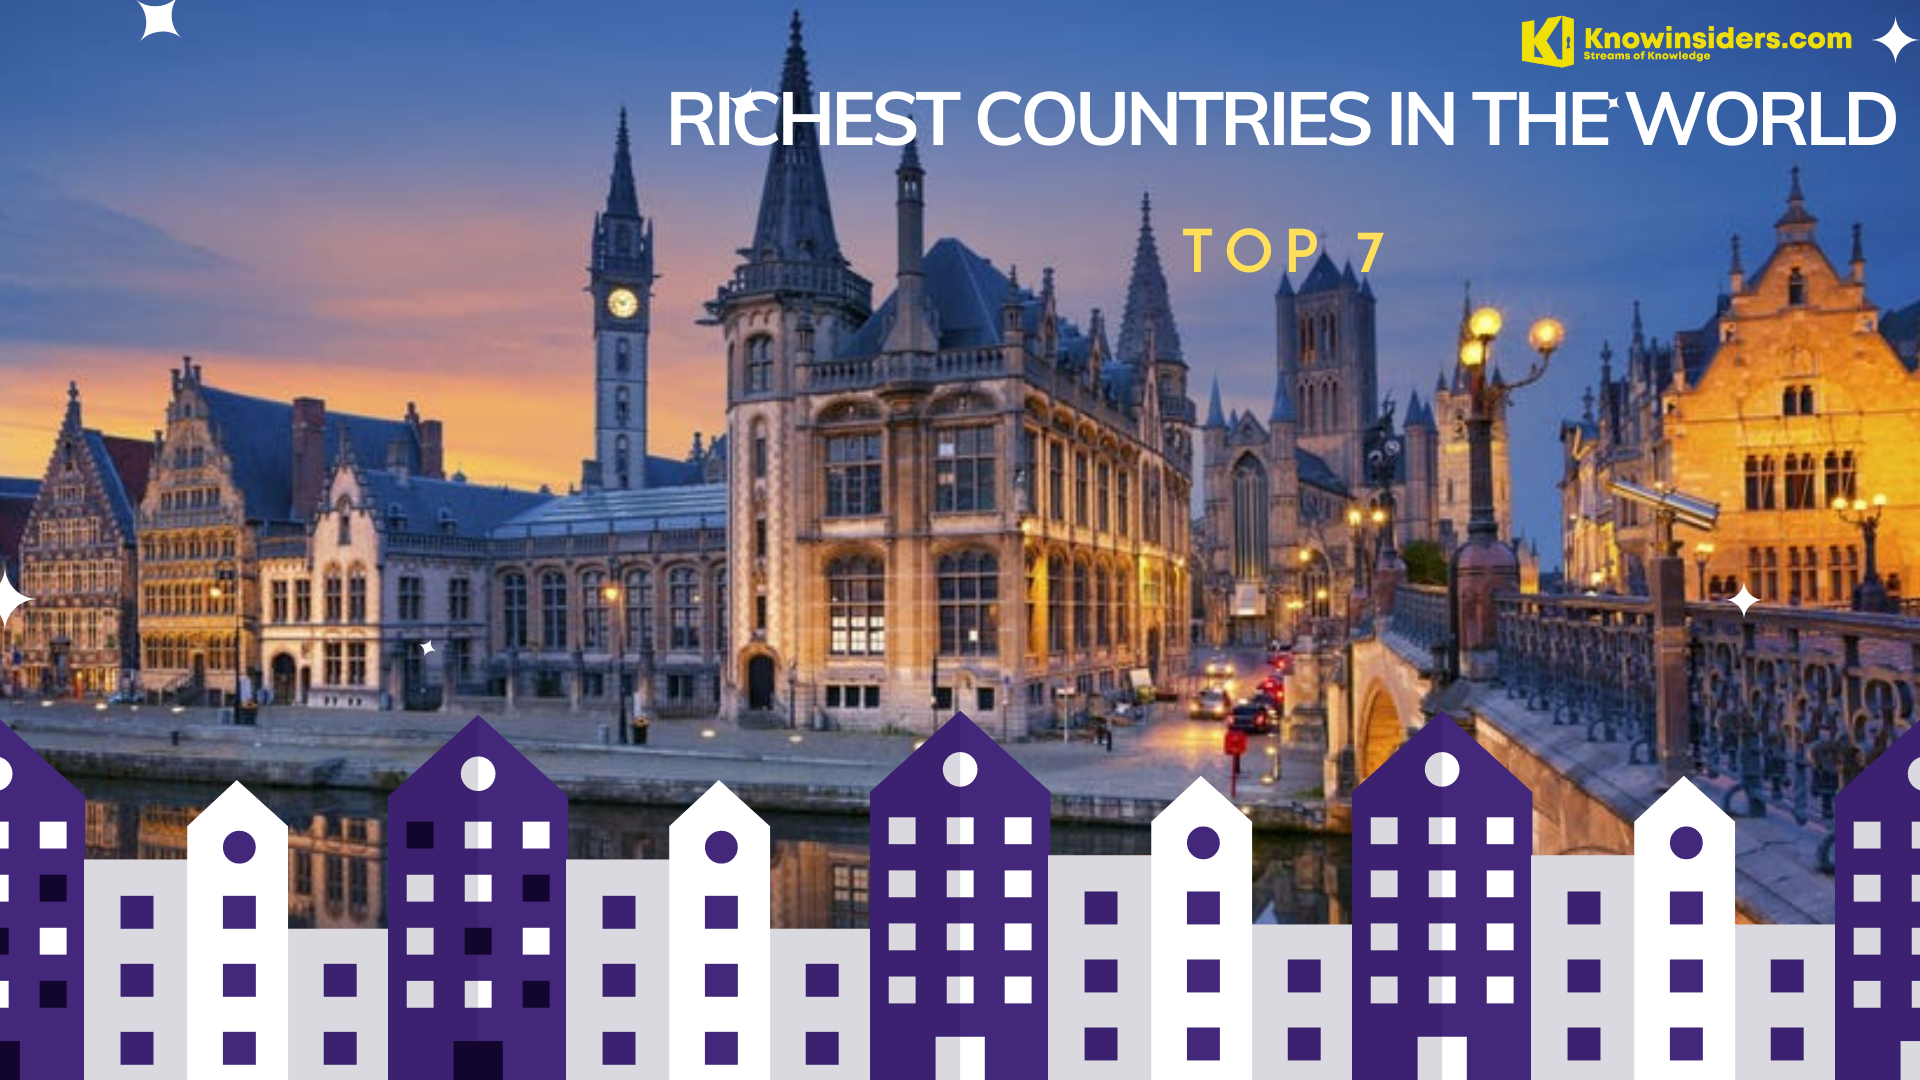 Top 7 Richest Countries In The World